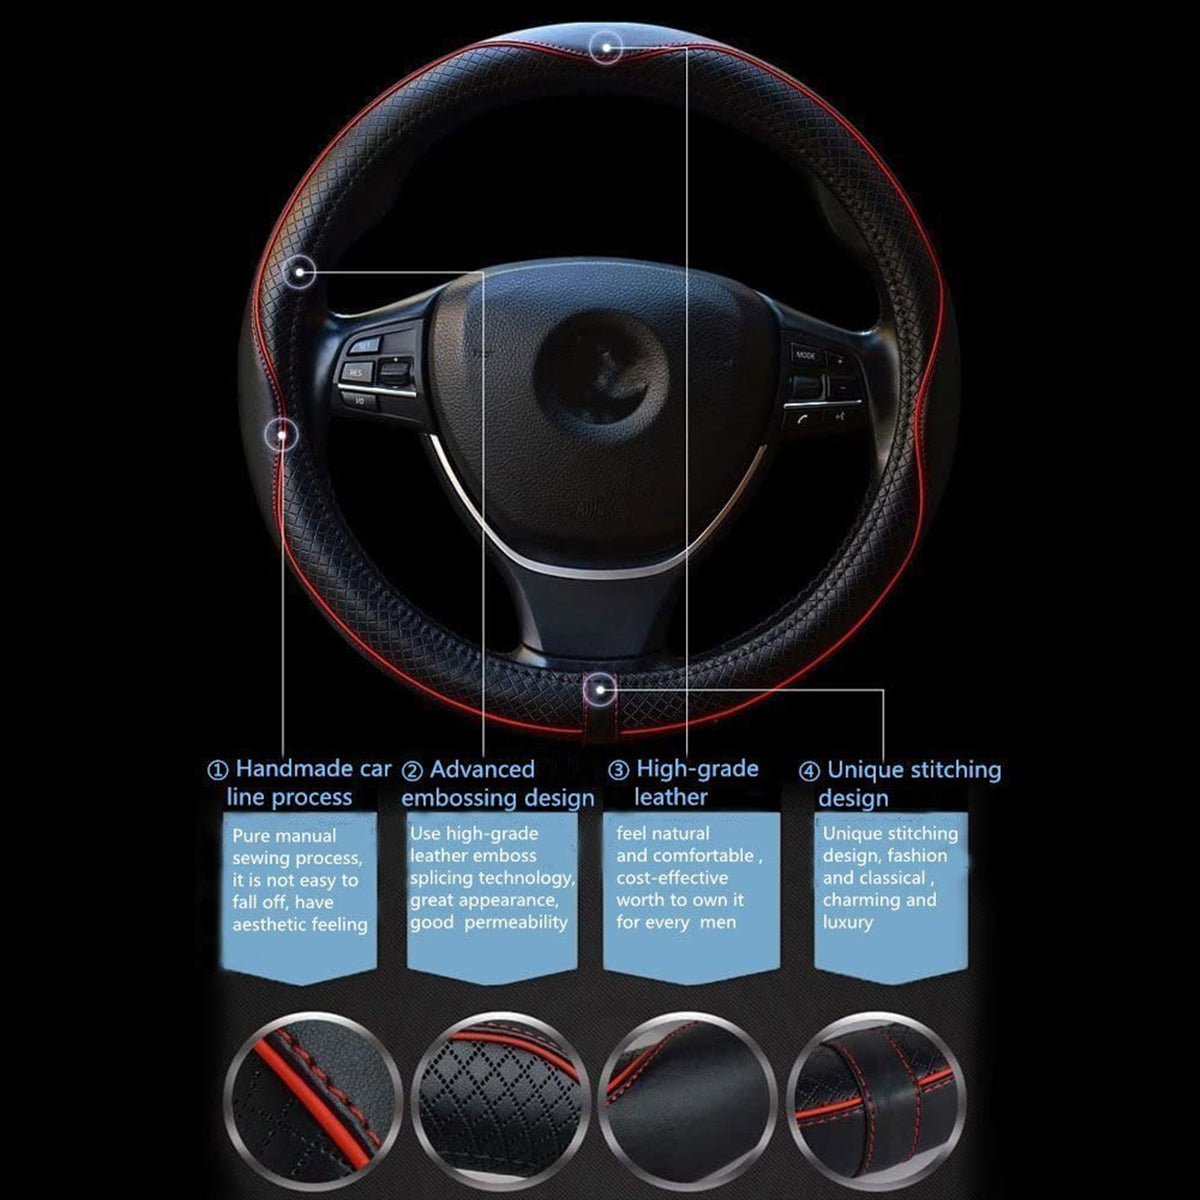 Car Steering Wheel Cover, Custom For Your Cars, Anti-Slip, Safety, Soft, Breathable, Heavy Duty, Thick, Full Surround, Sports Style, Car Accessories HY18990 - Delicate Leather